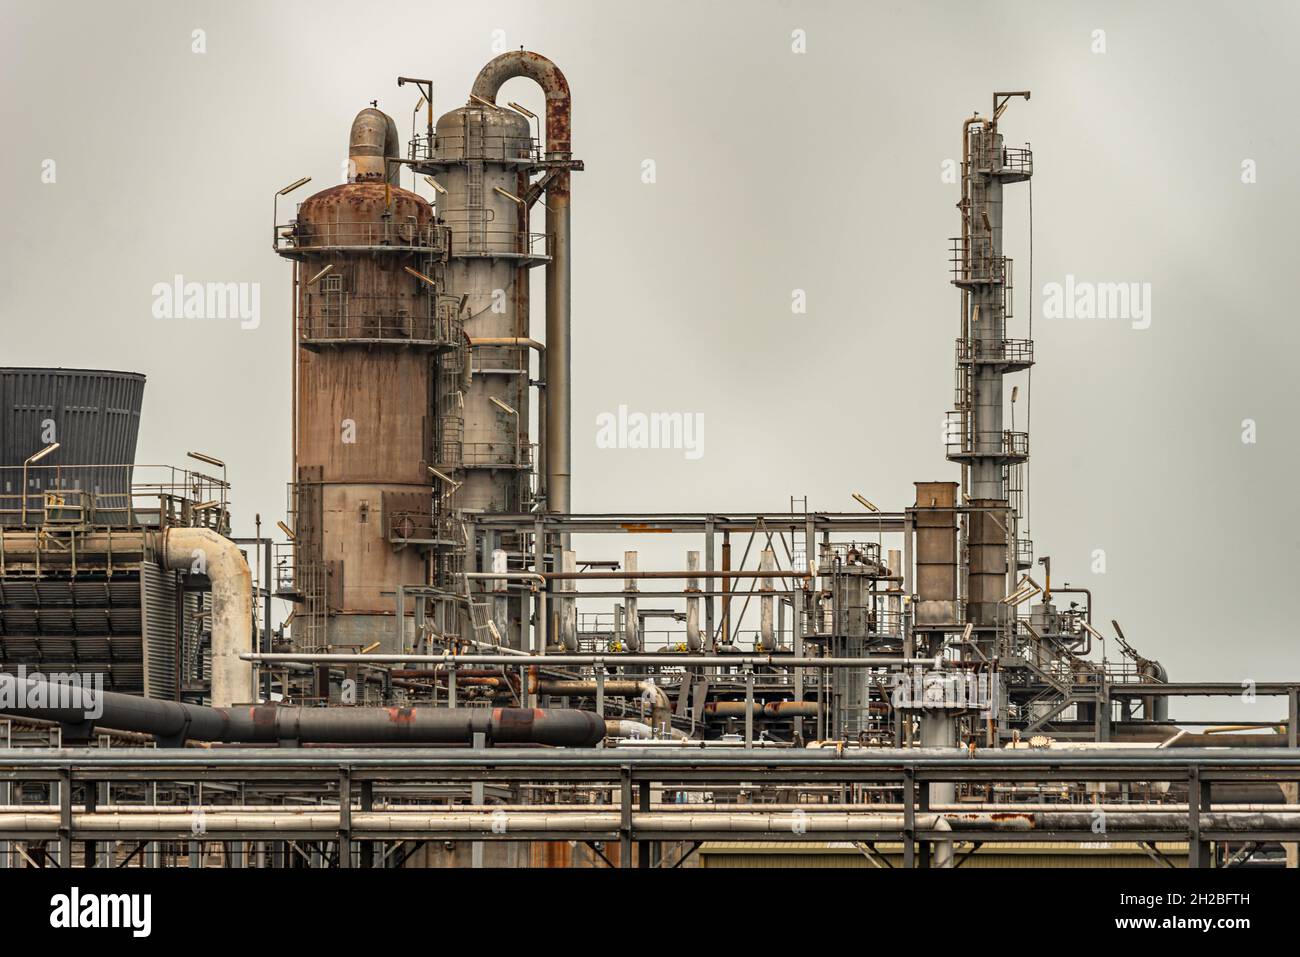 steel and pipes for the oil and gas towers for refining gas liquids Stock Photo